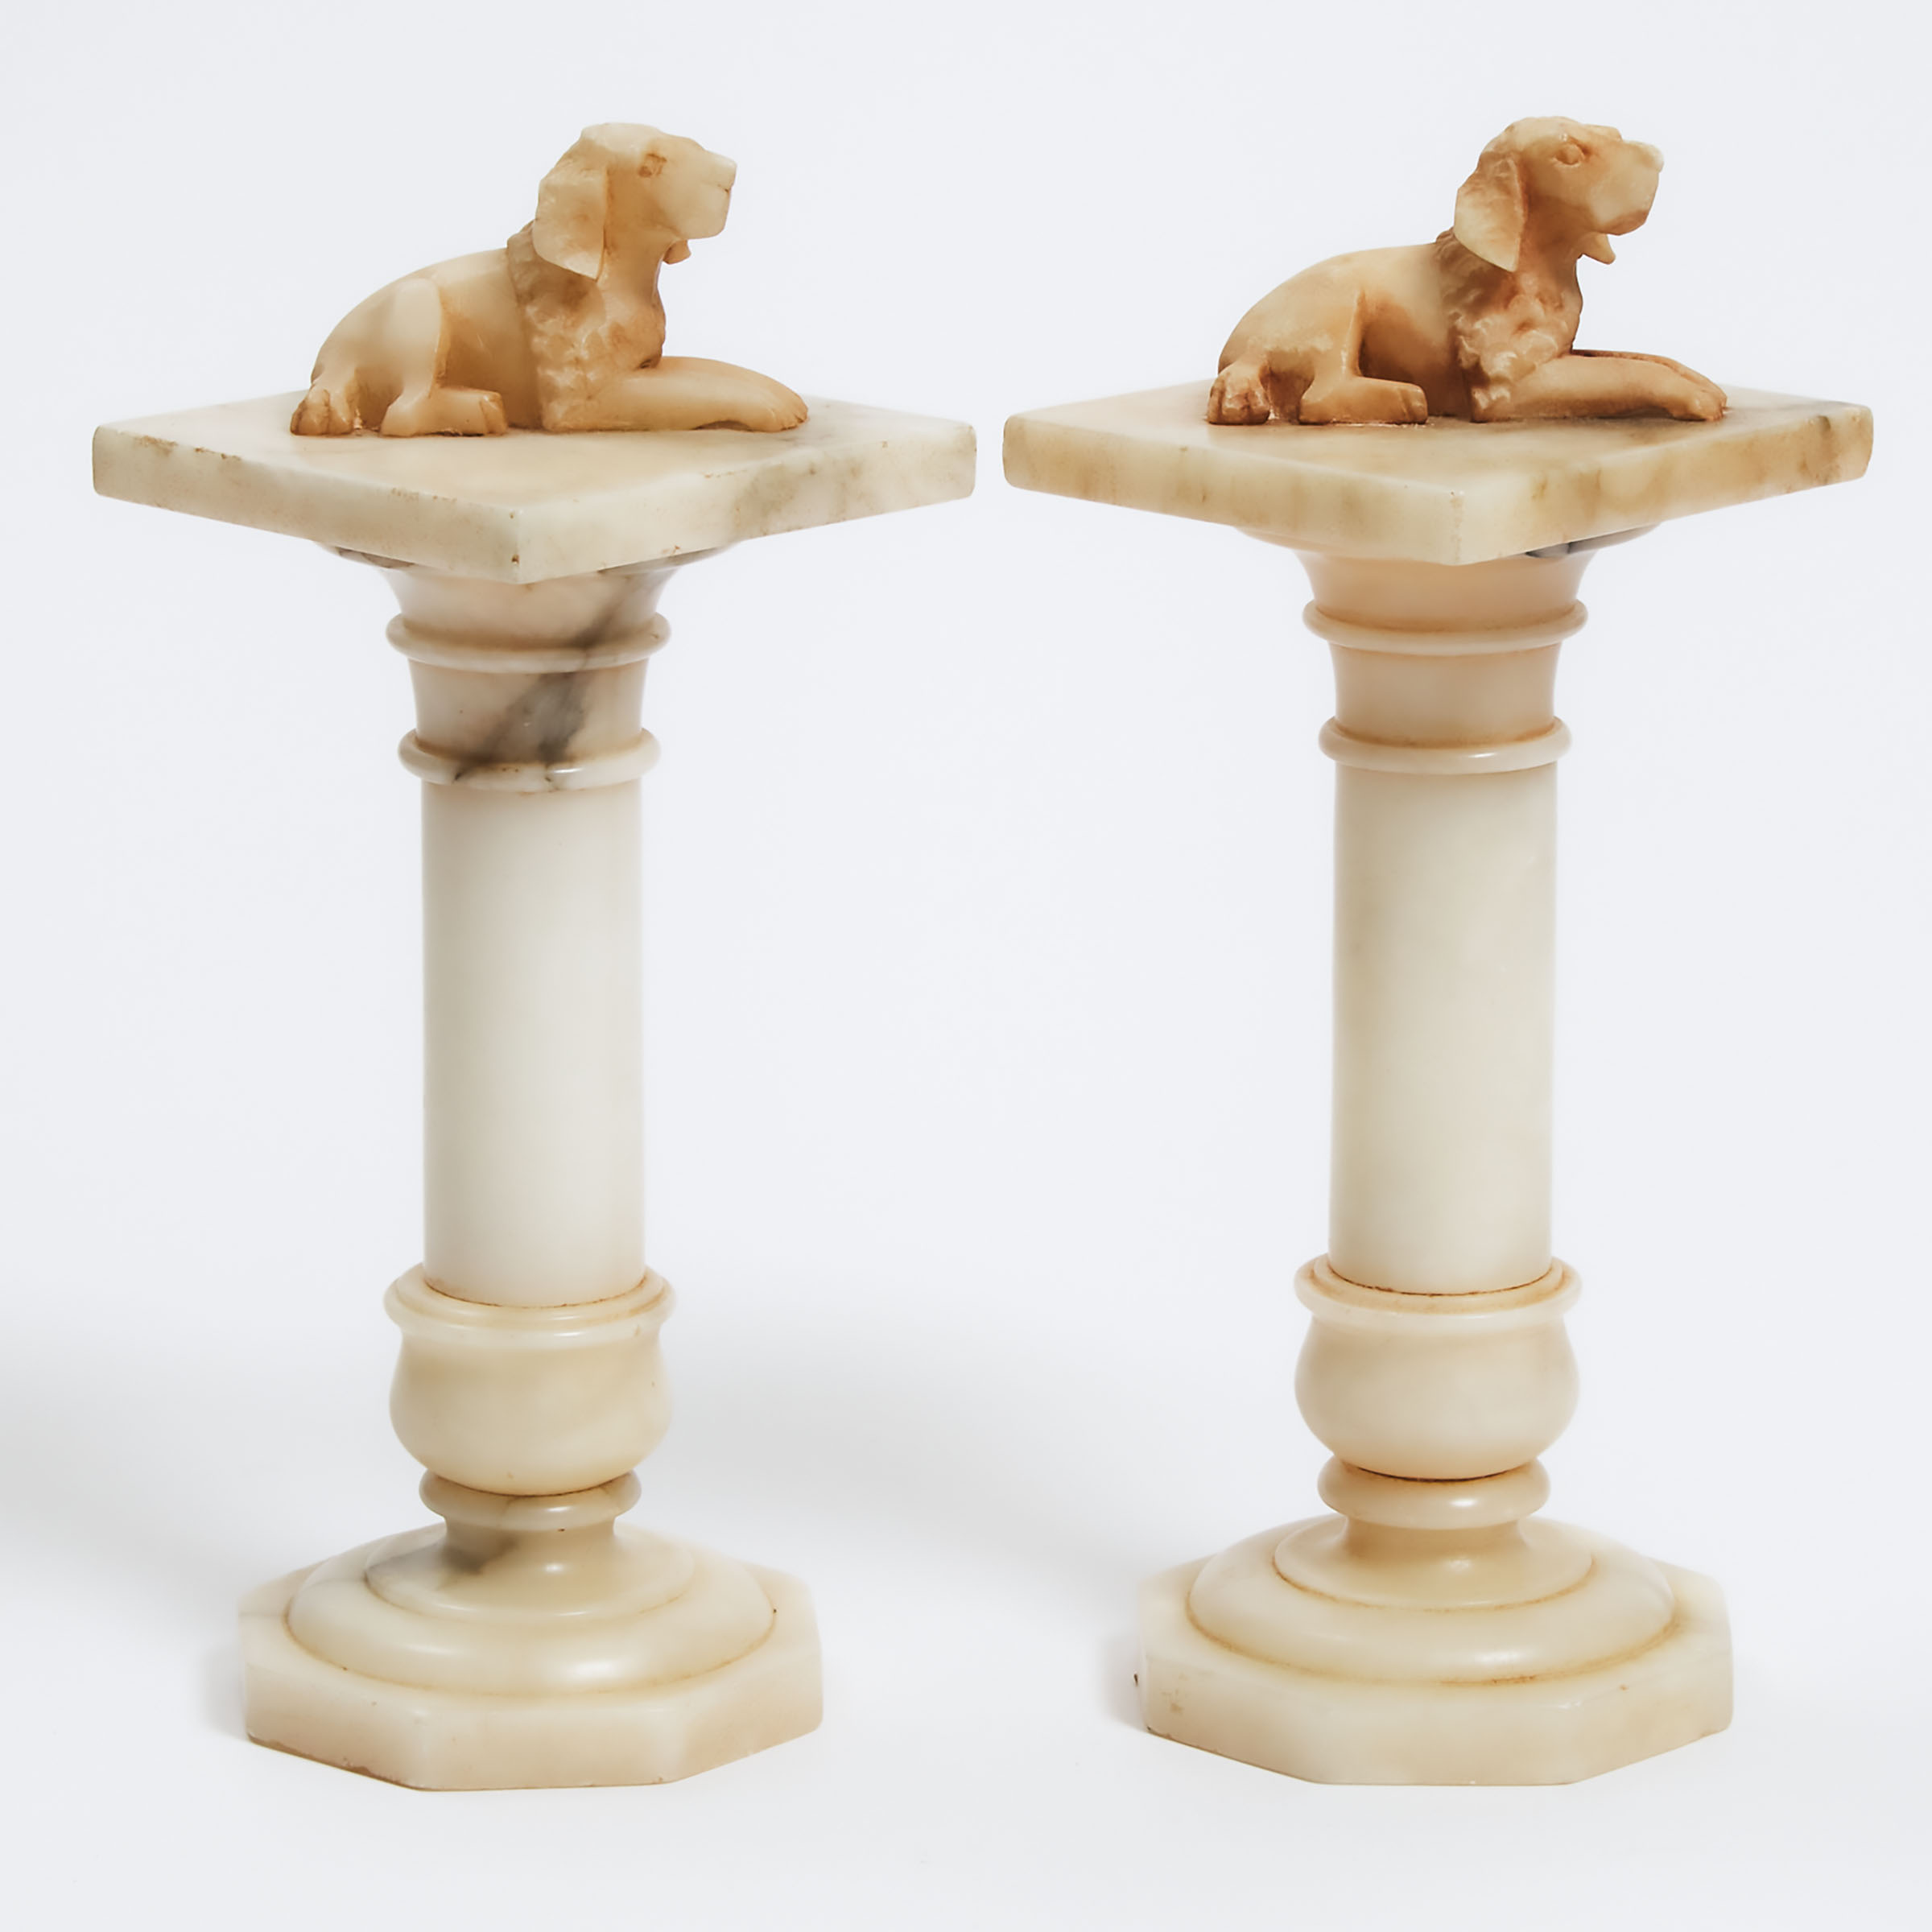 Pair of Italian Dog Form Mantle Garnitures, 19th/early 20th century